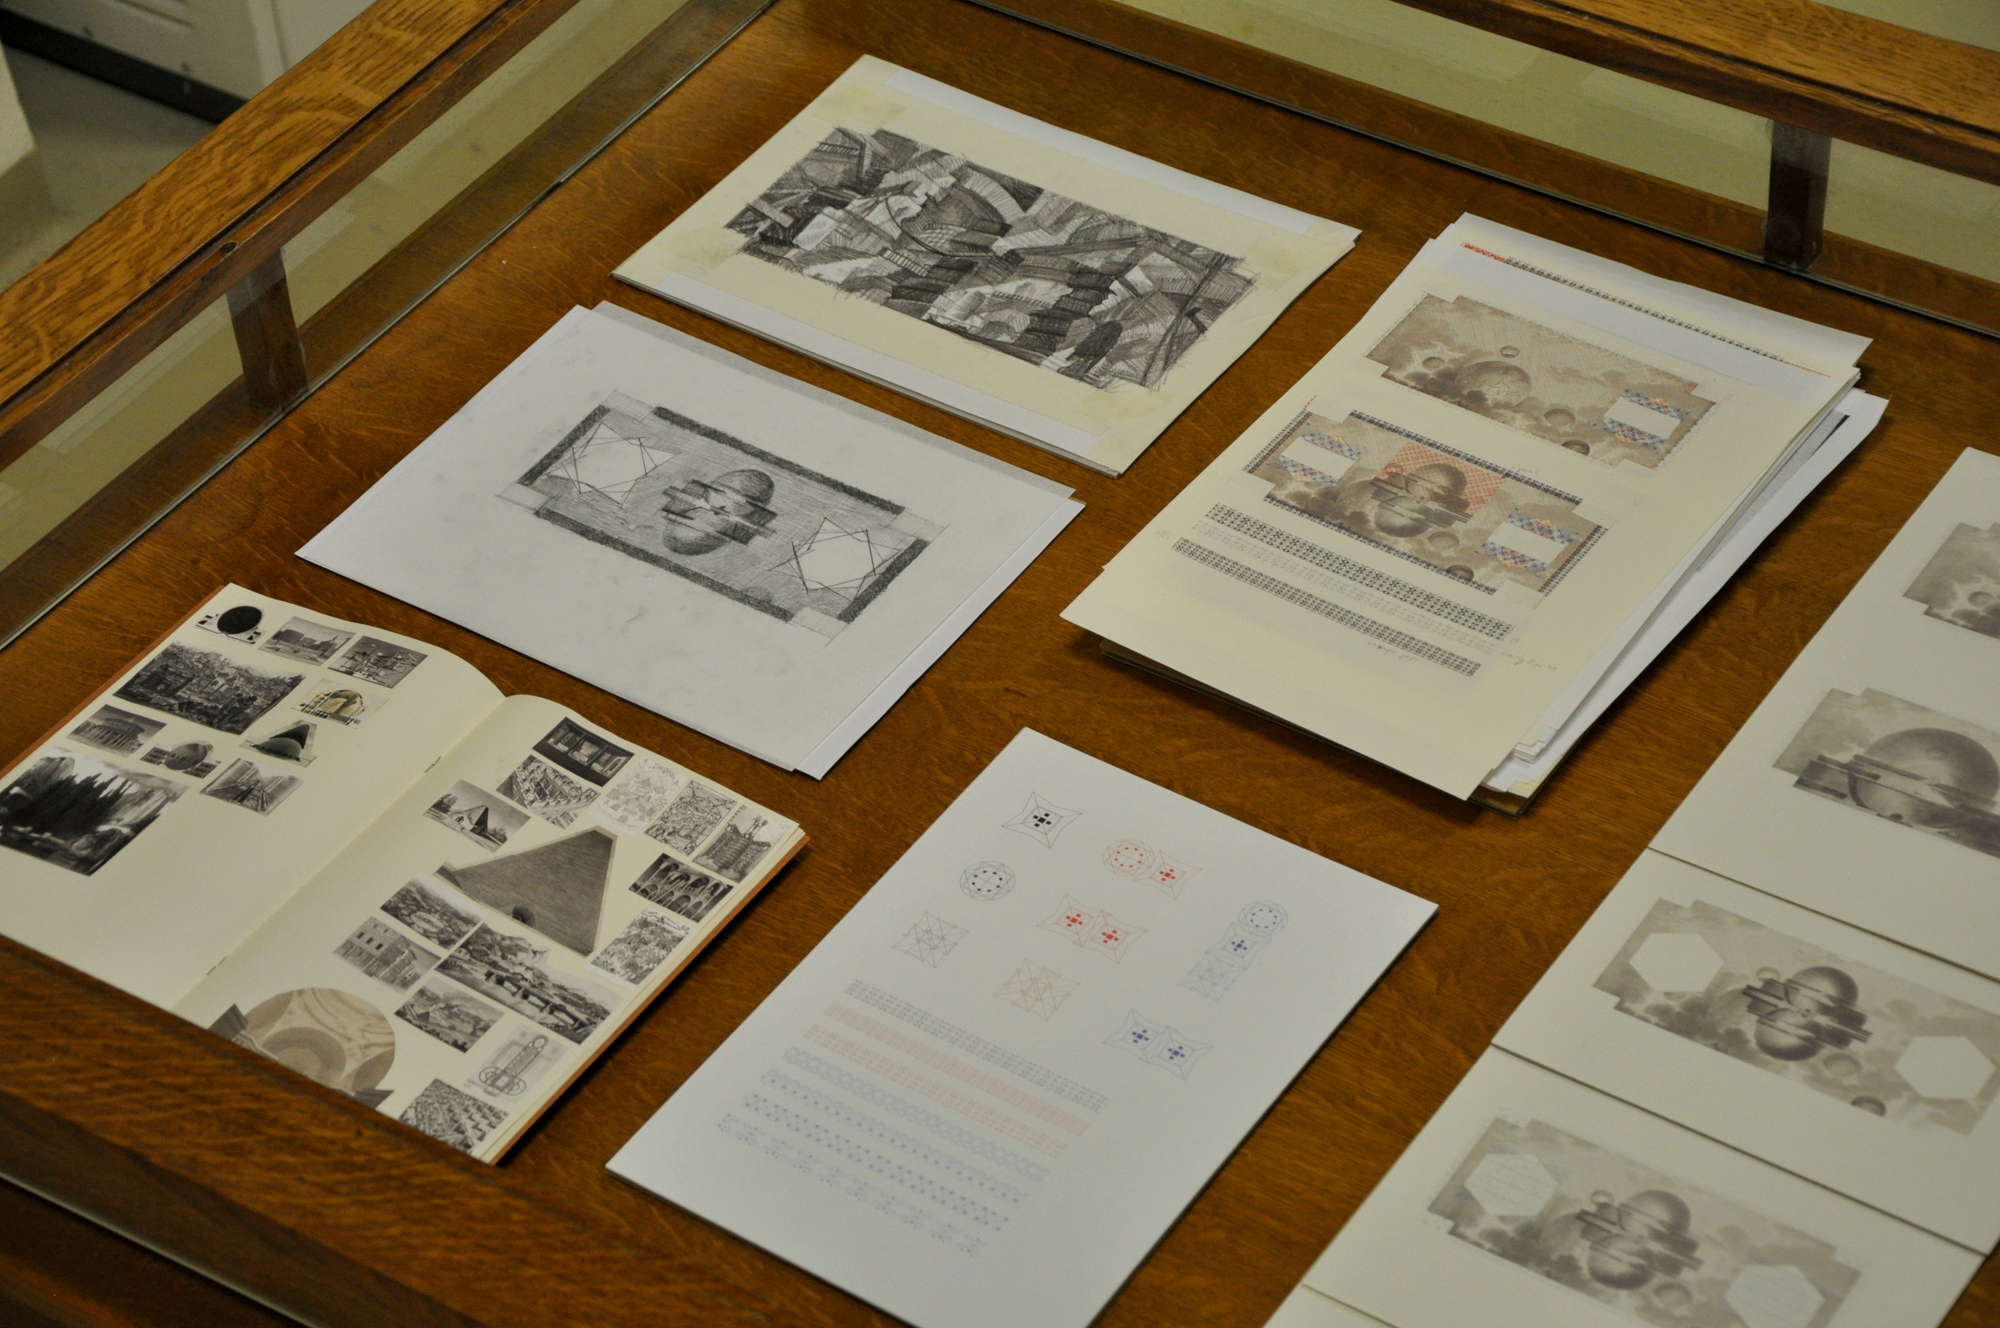 a display case contains digital prints, drawings, and collages